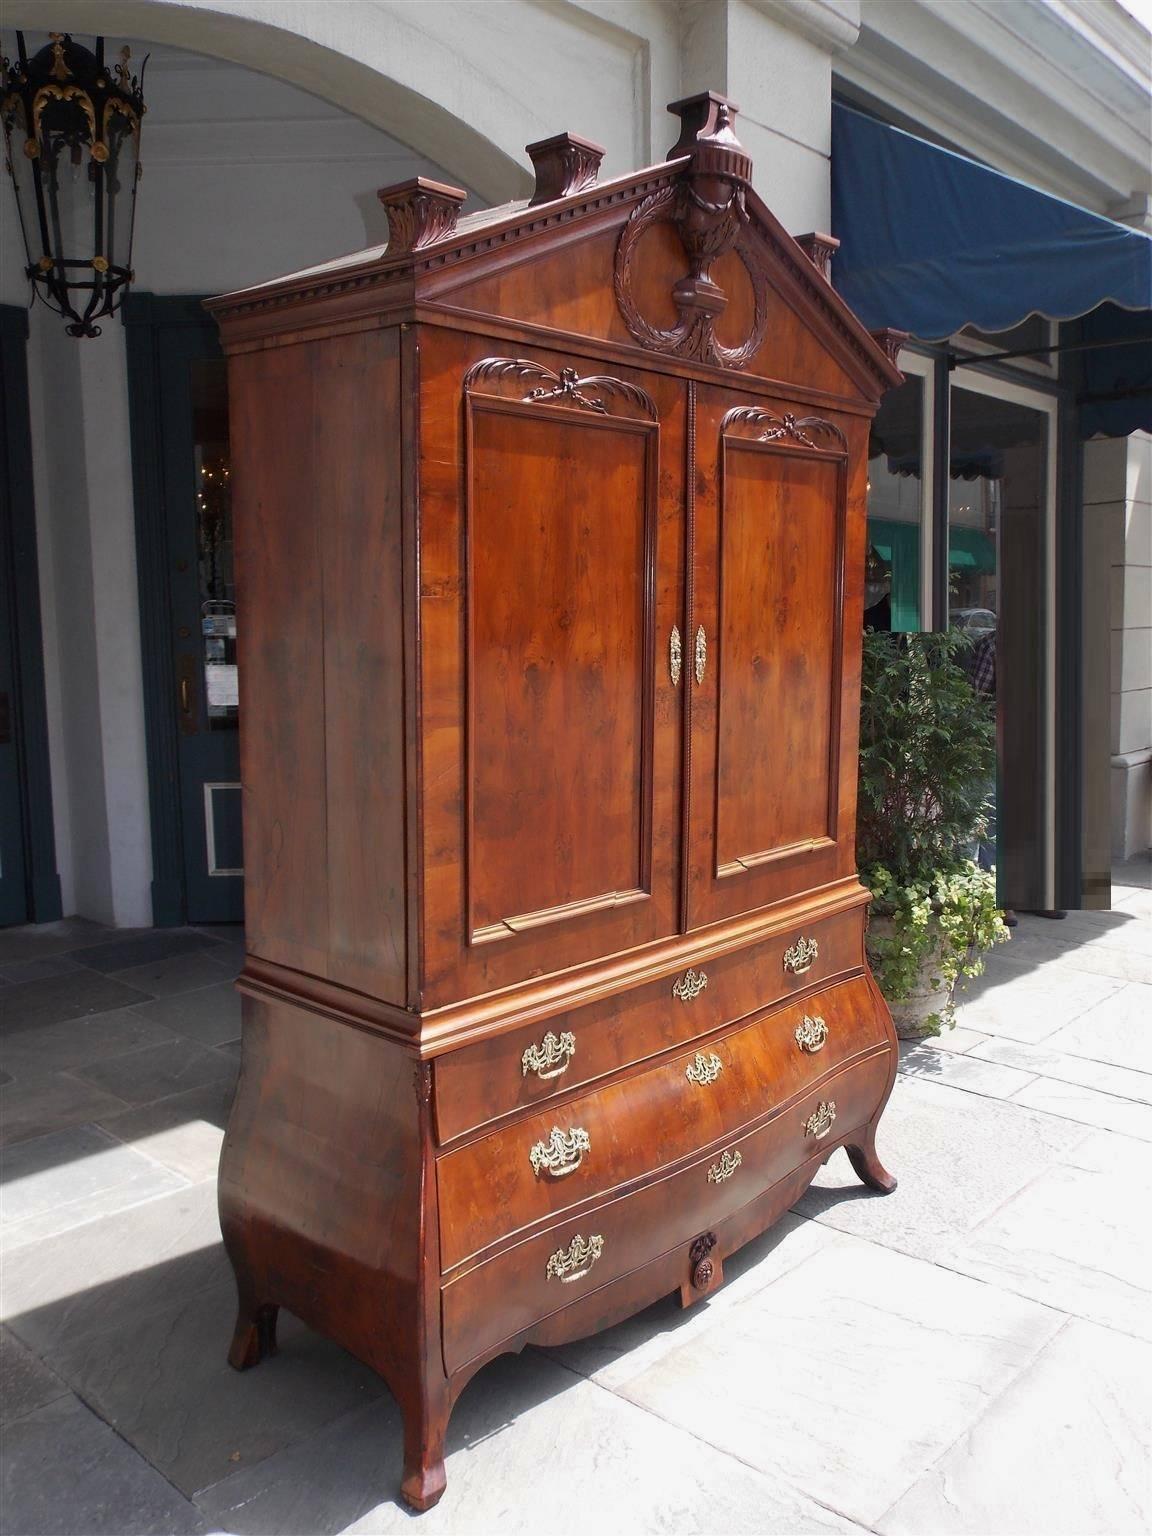 Dutch Yew Wood linen press with an upper case paladian acanthus cornice, centered urn with laurel wreath, dental molding, over flanking floral carved doors concealing a fitted interior shelving and three drawers. Press has a lower Bombay three